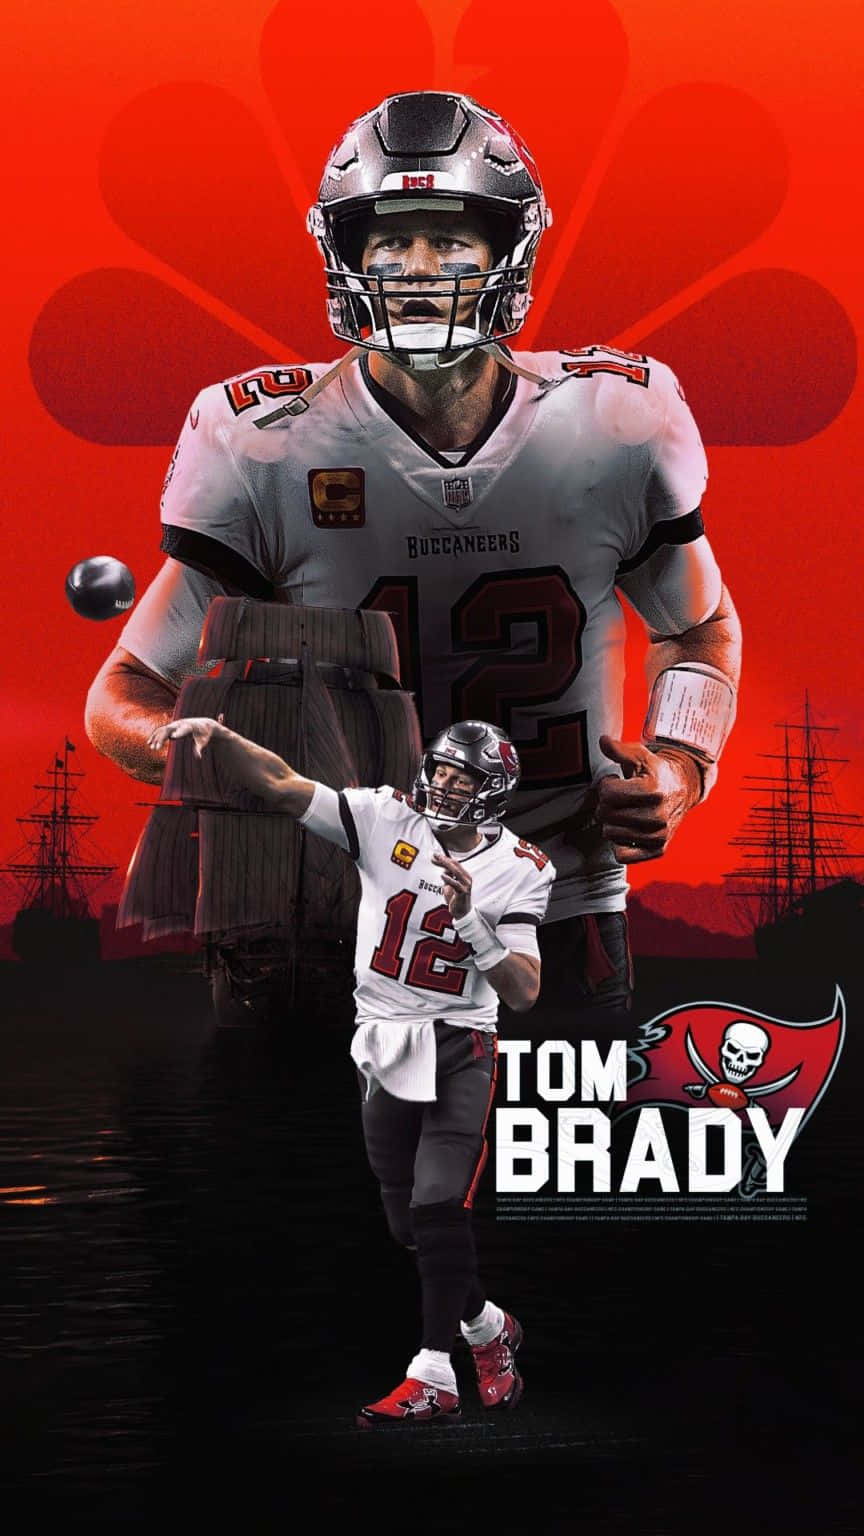 Show Your Team Pride with Tampa Bay Buccaneers iPhone Wallpaper